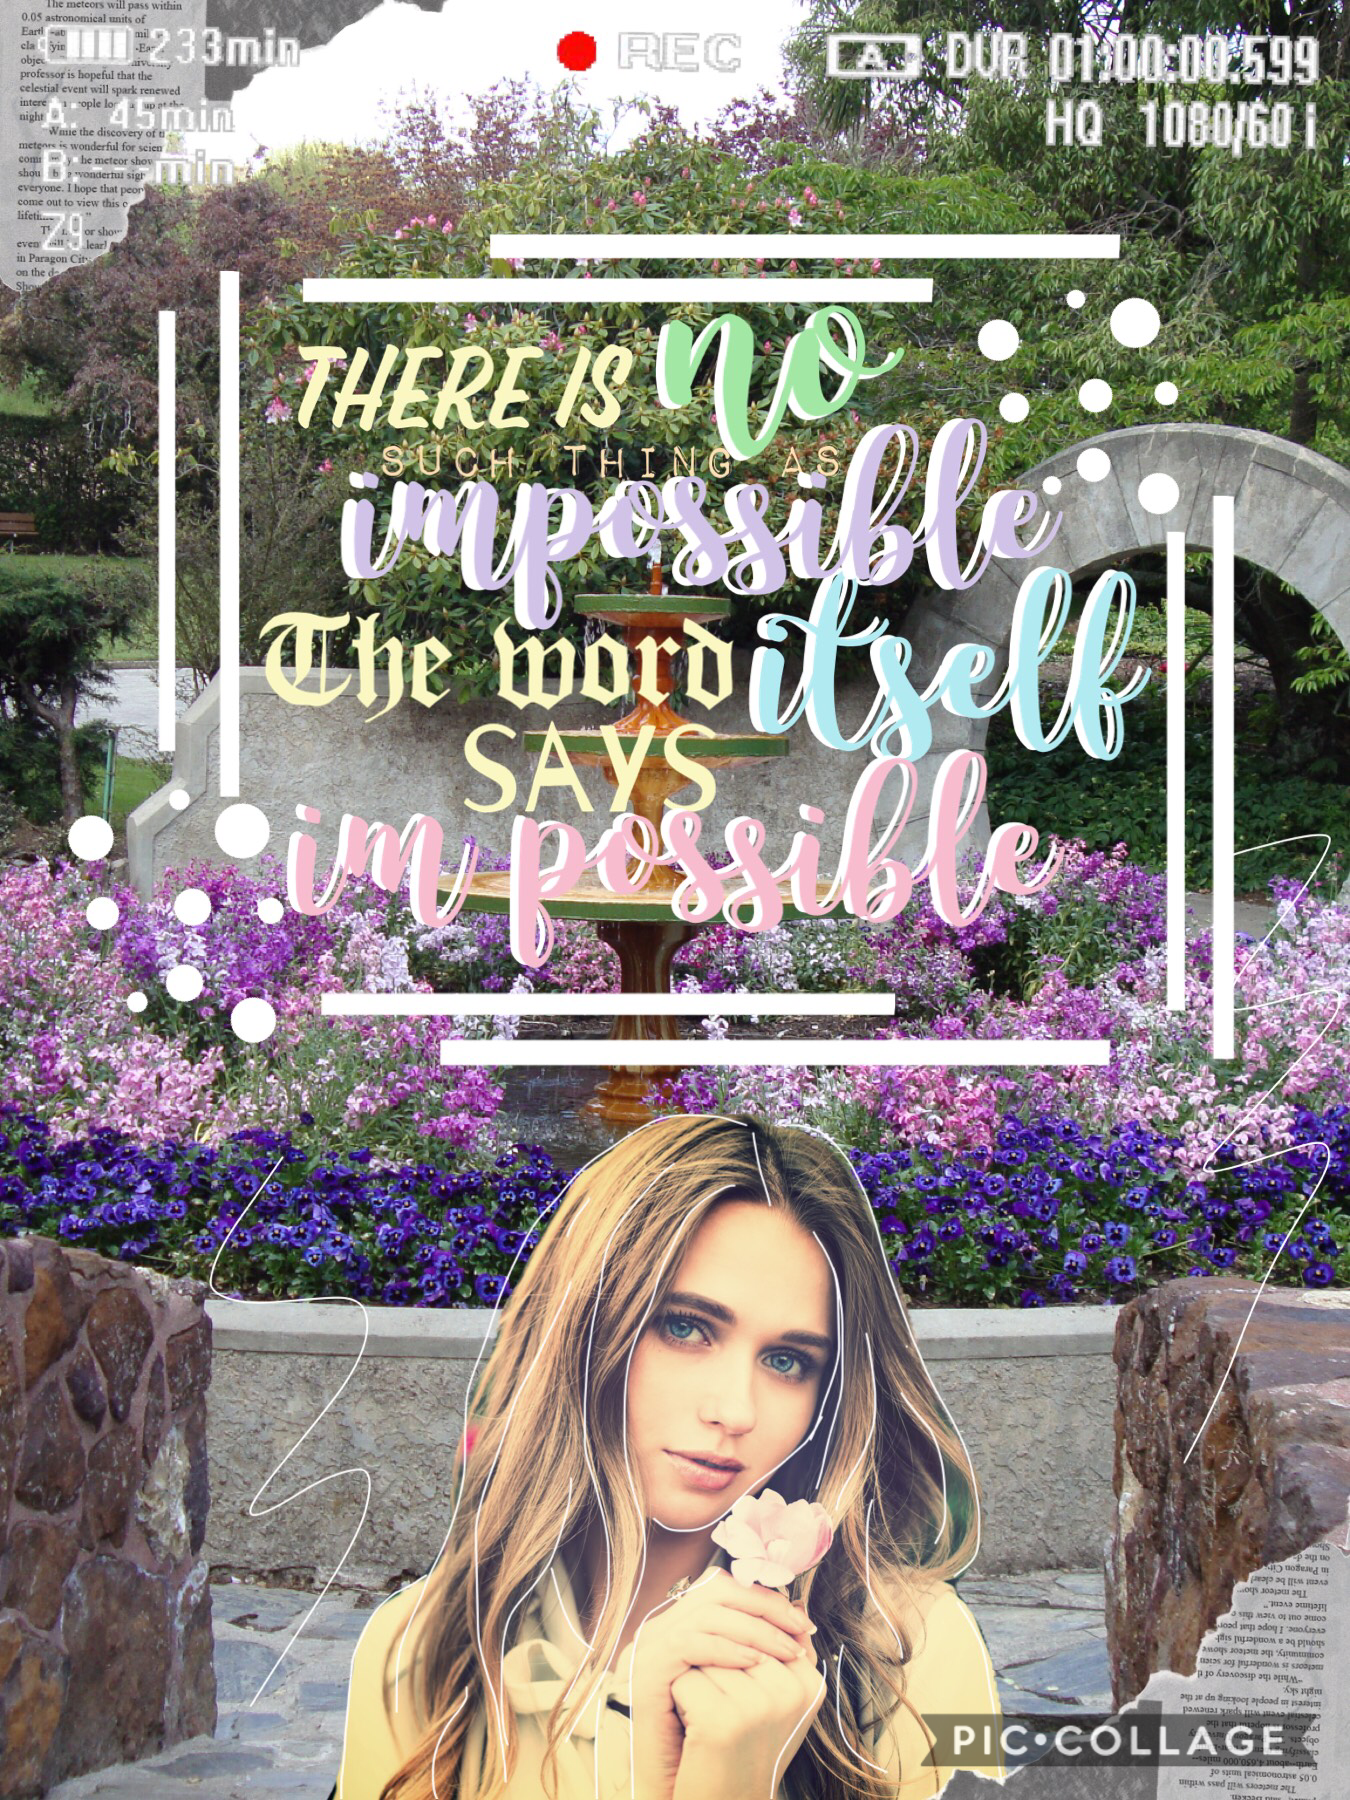 tappy 💜
can someone tell me why this took like two hours to make? it isn’t that good and all I like about it is the text and pic. that’s about it. idk if it’s just my pickiness or it looks rlly bad. 😂 comment what you think. ⬇️⬇️⬇️